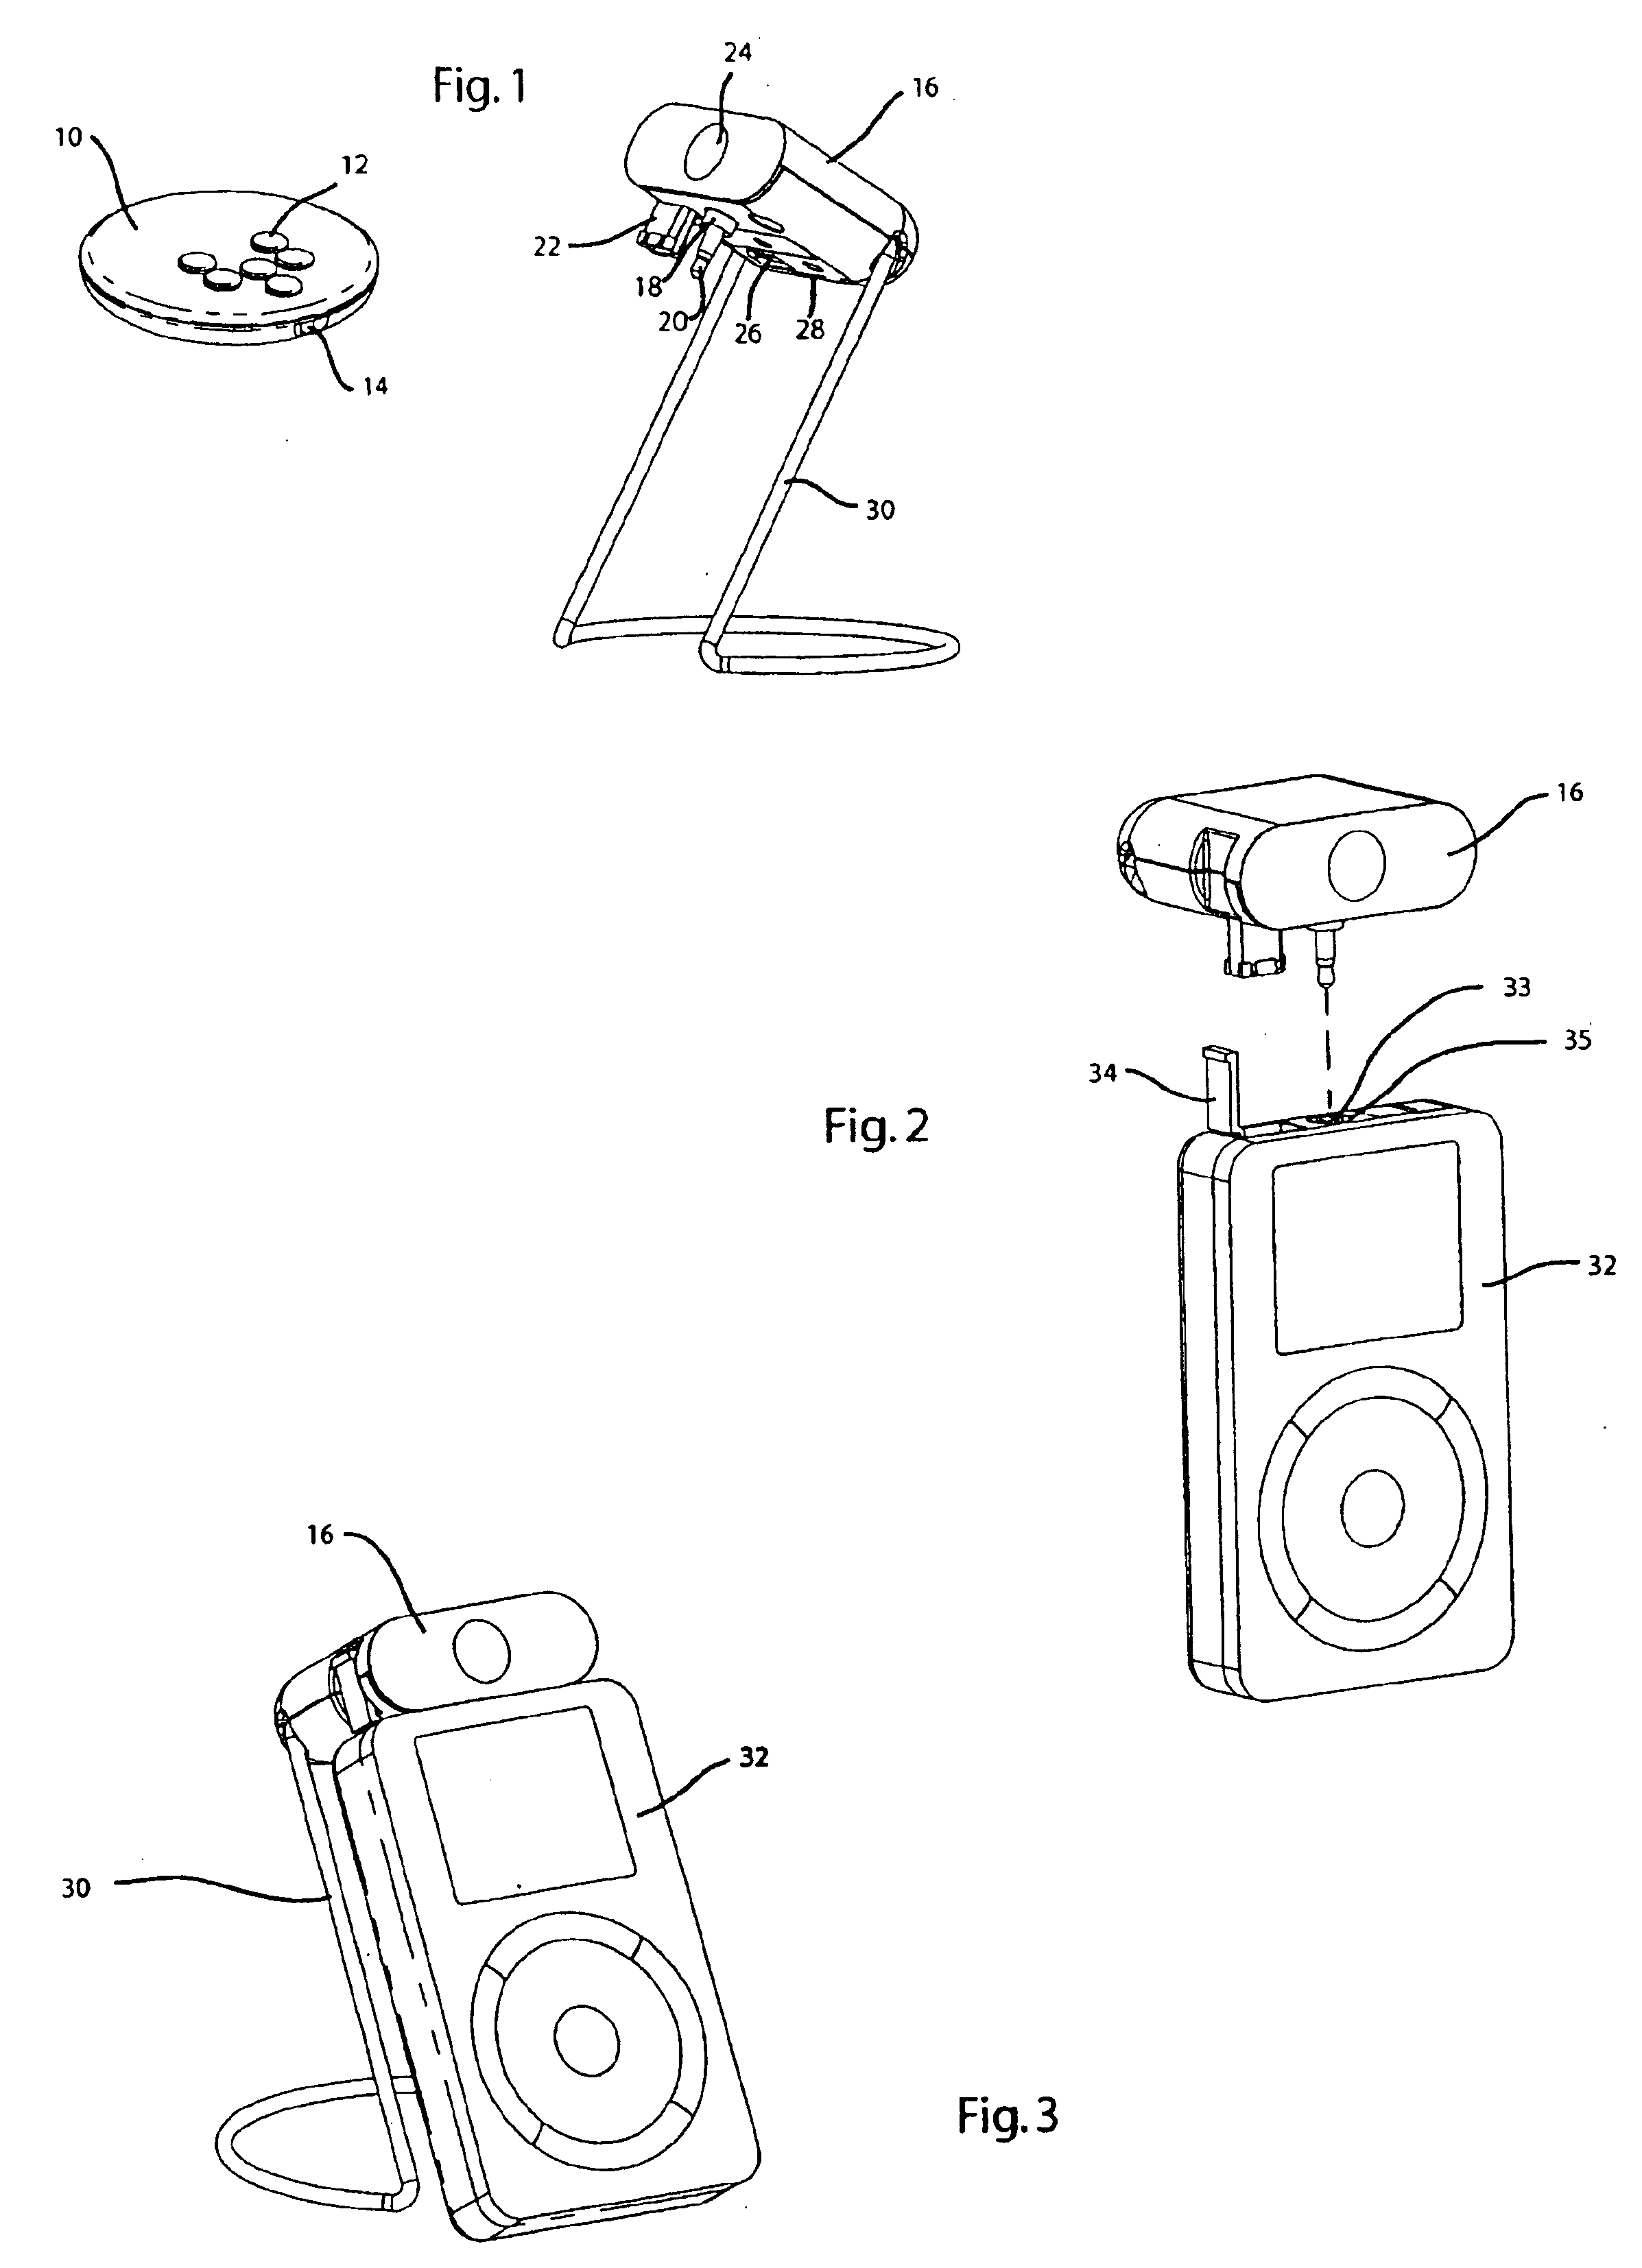 Method of Adding Wireless Remote Control to Audio Playback Devices Equipped for Wired Remote Control